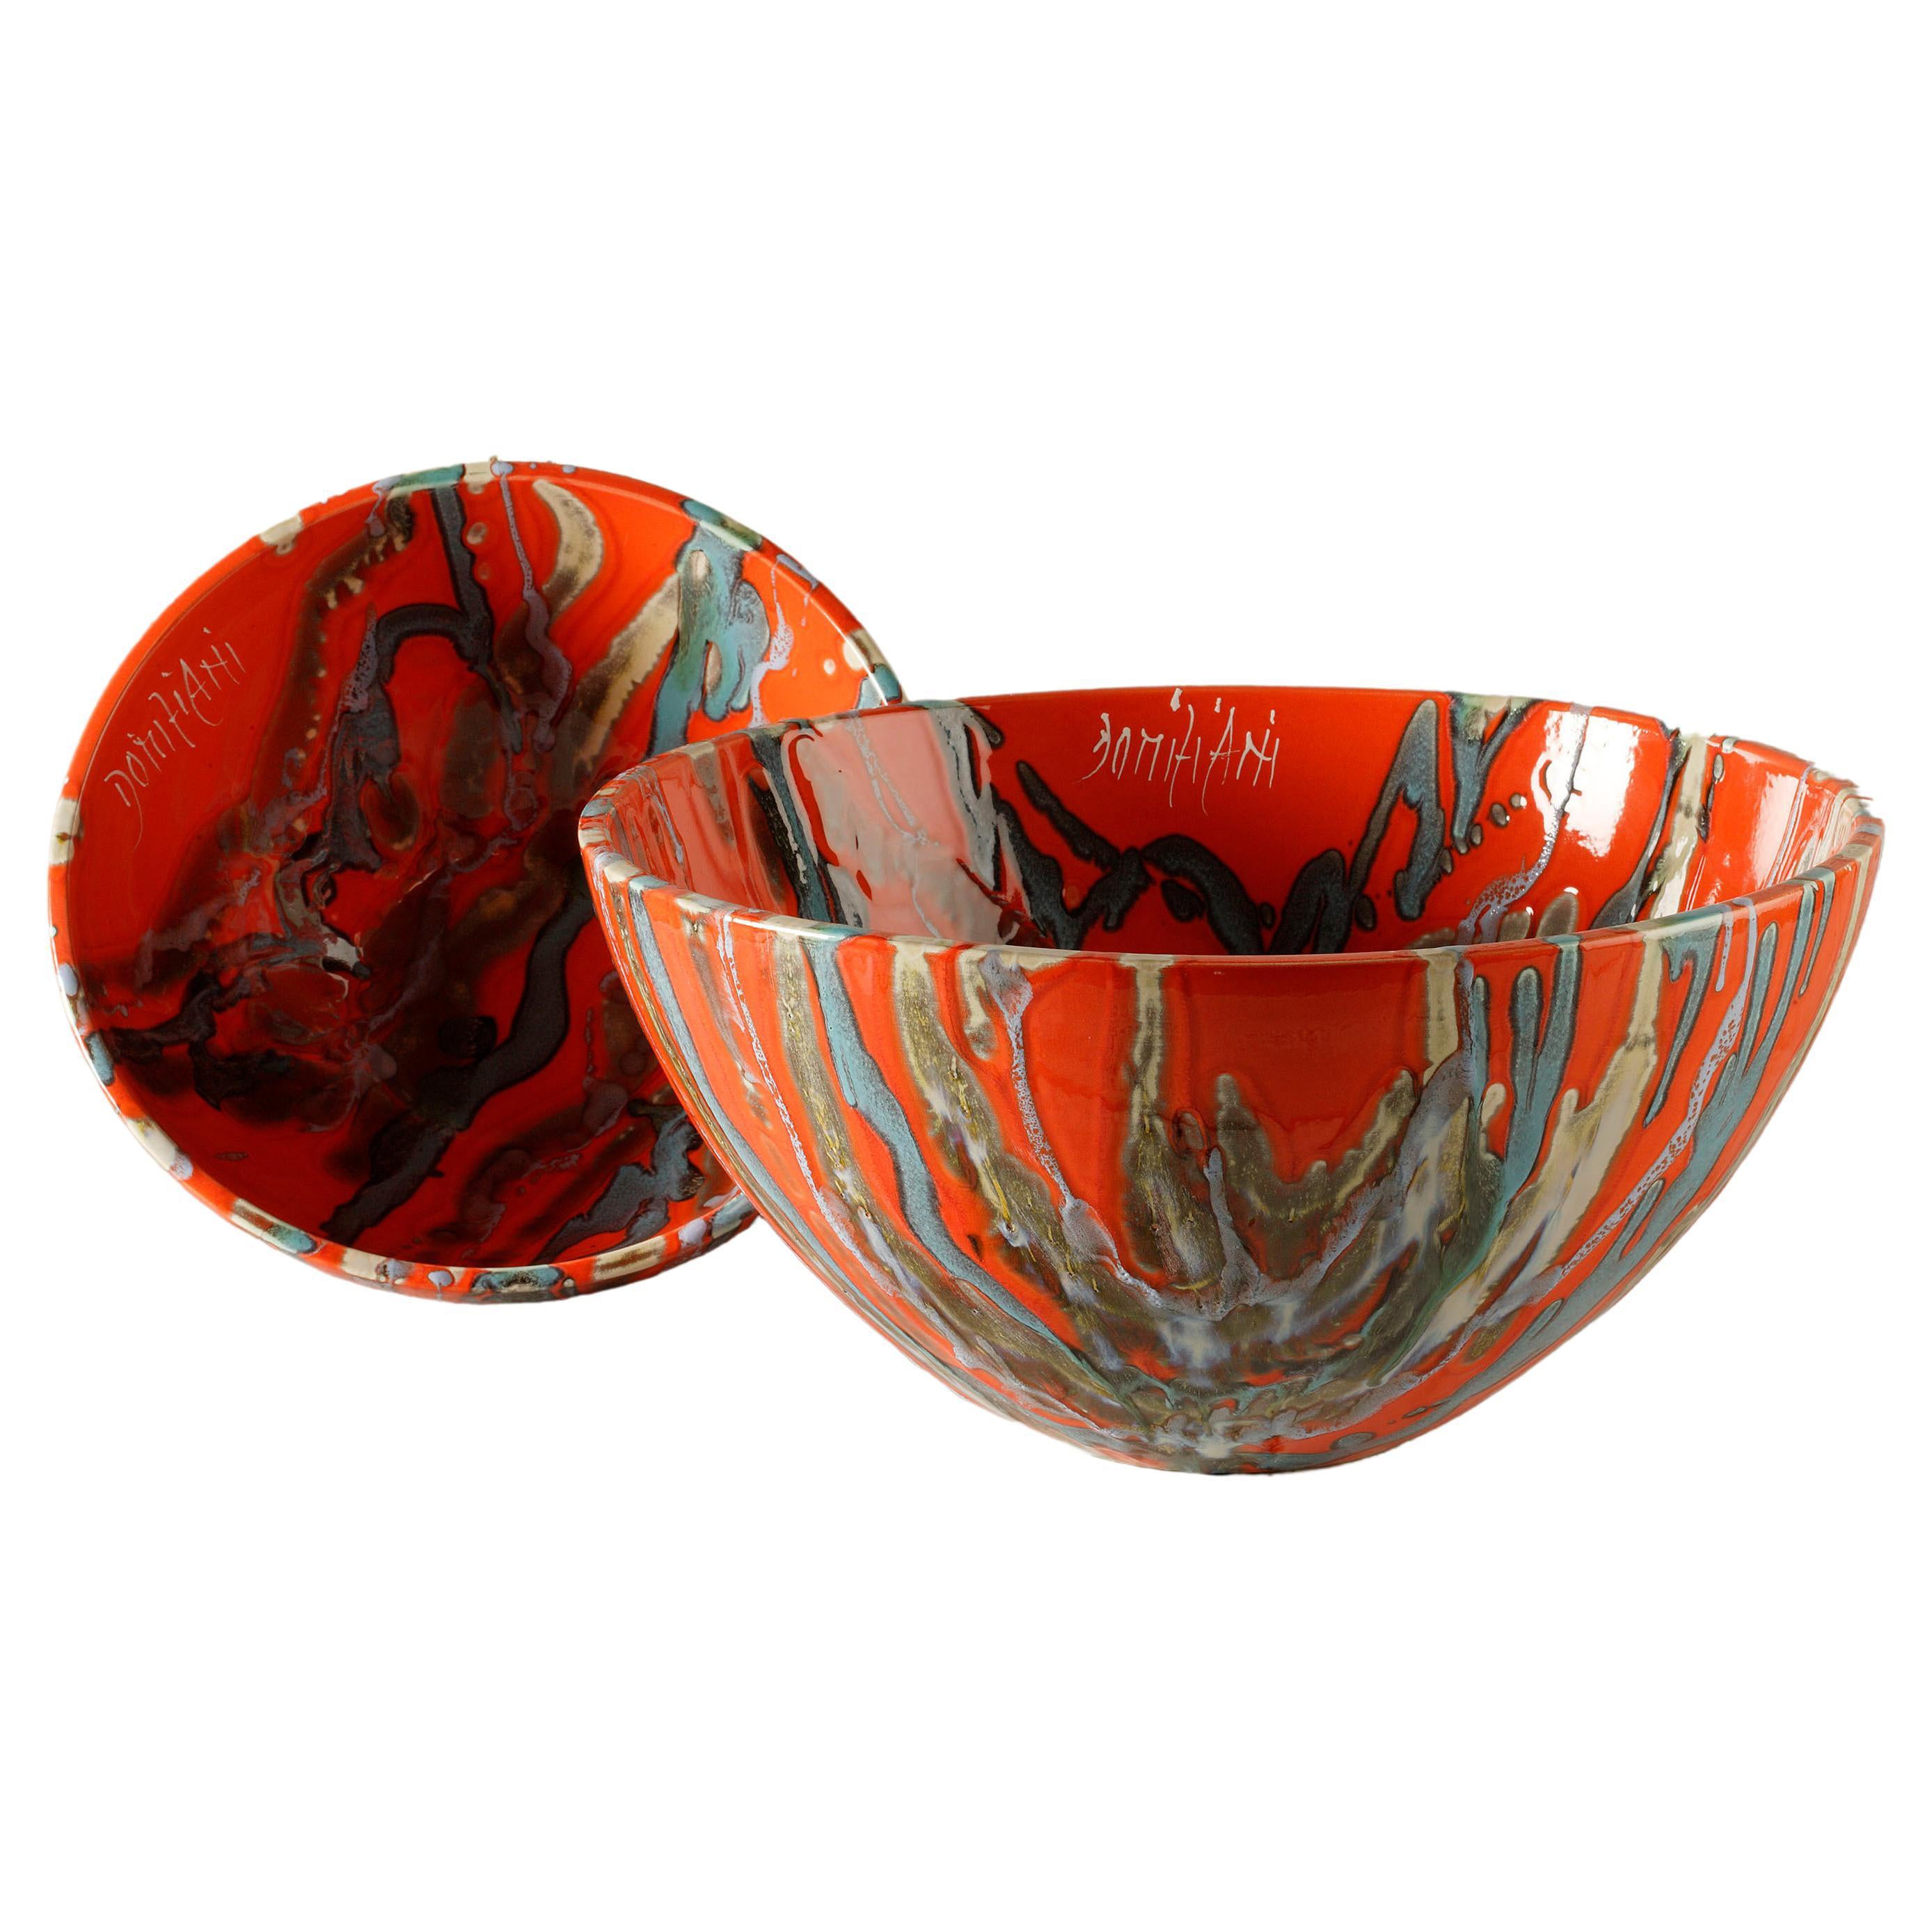 Ceramic Bowl, Ø 10 cm x H 5 cm Handmade in Italy 2021, Choose Your Pattern For Sale